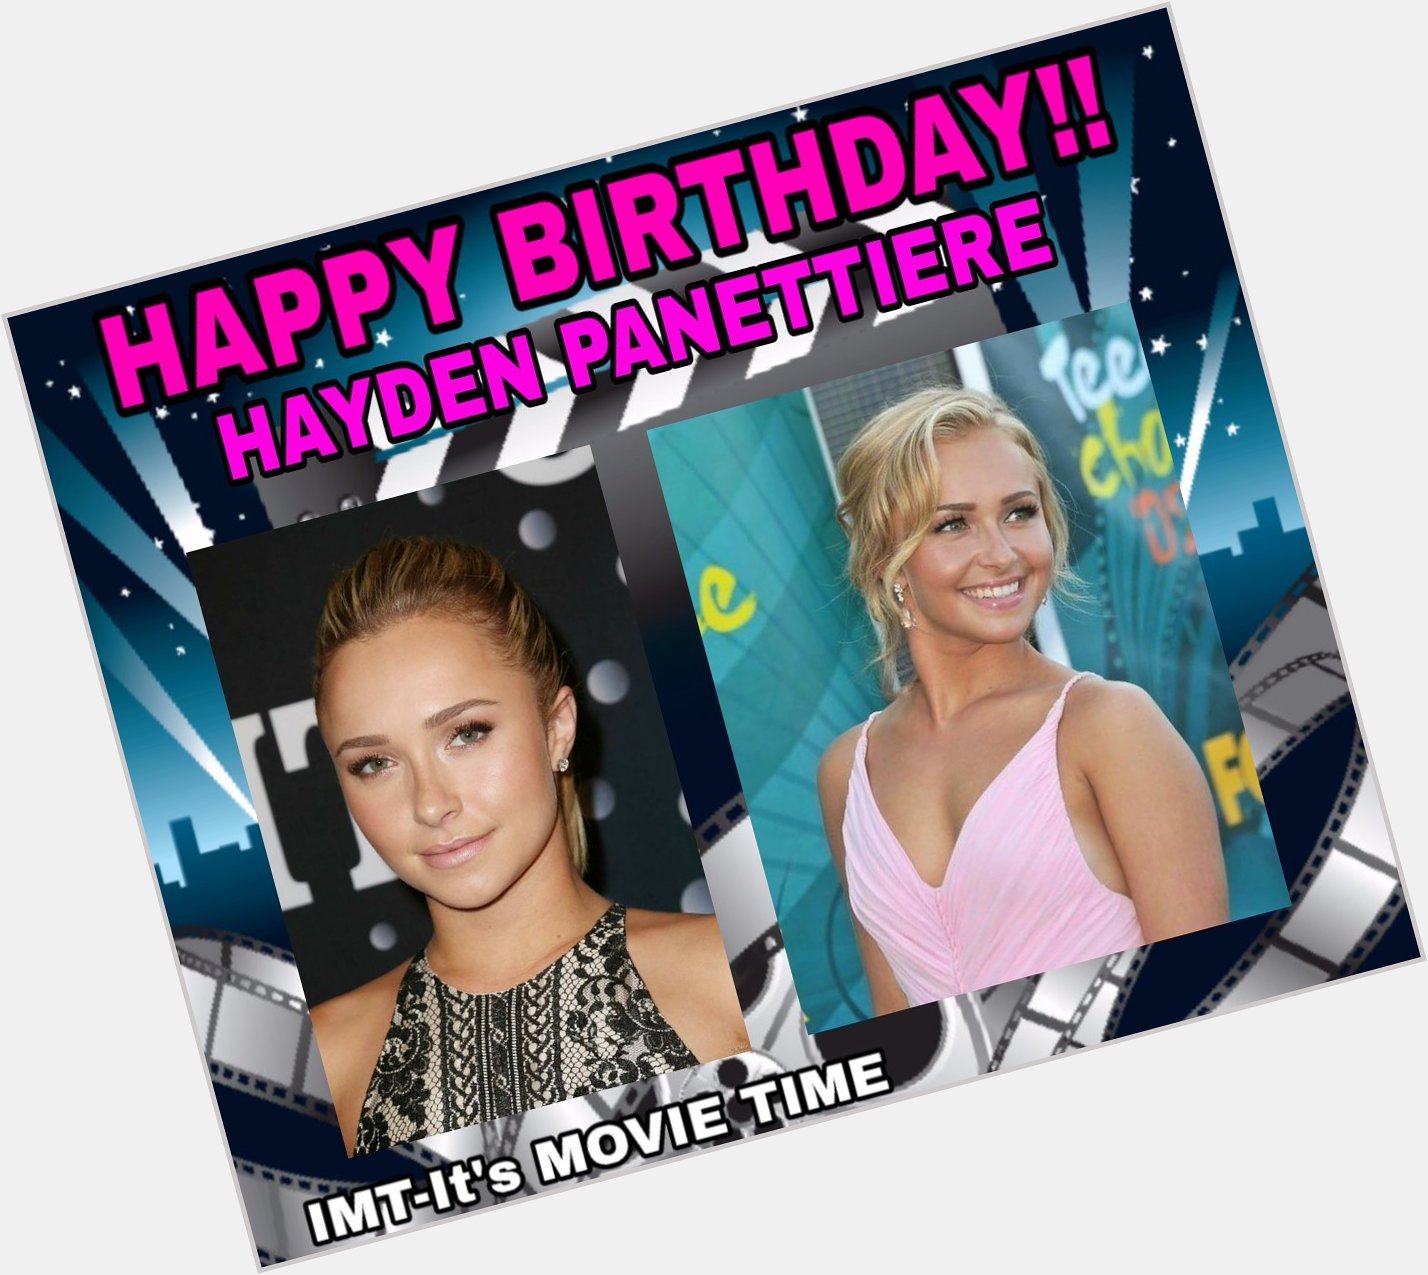 Happy Birthday to the Beautiful Hayden Panettiere! The actress is celebrating 31 years. 